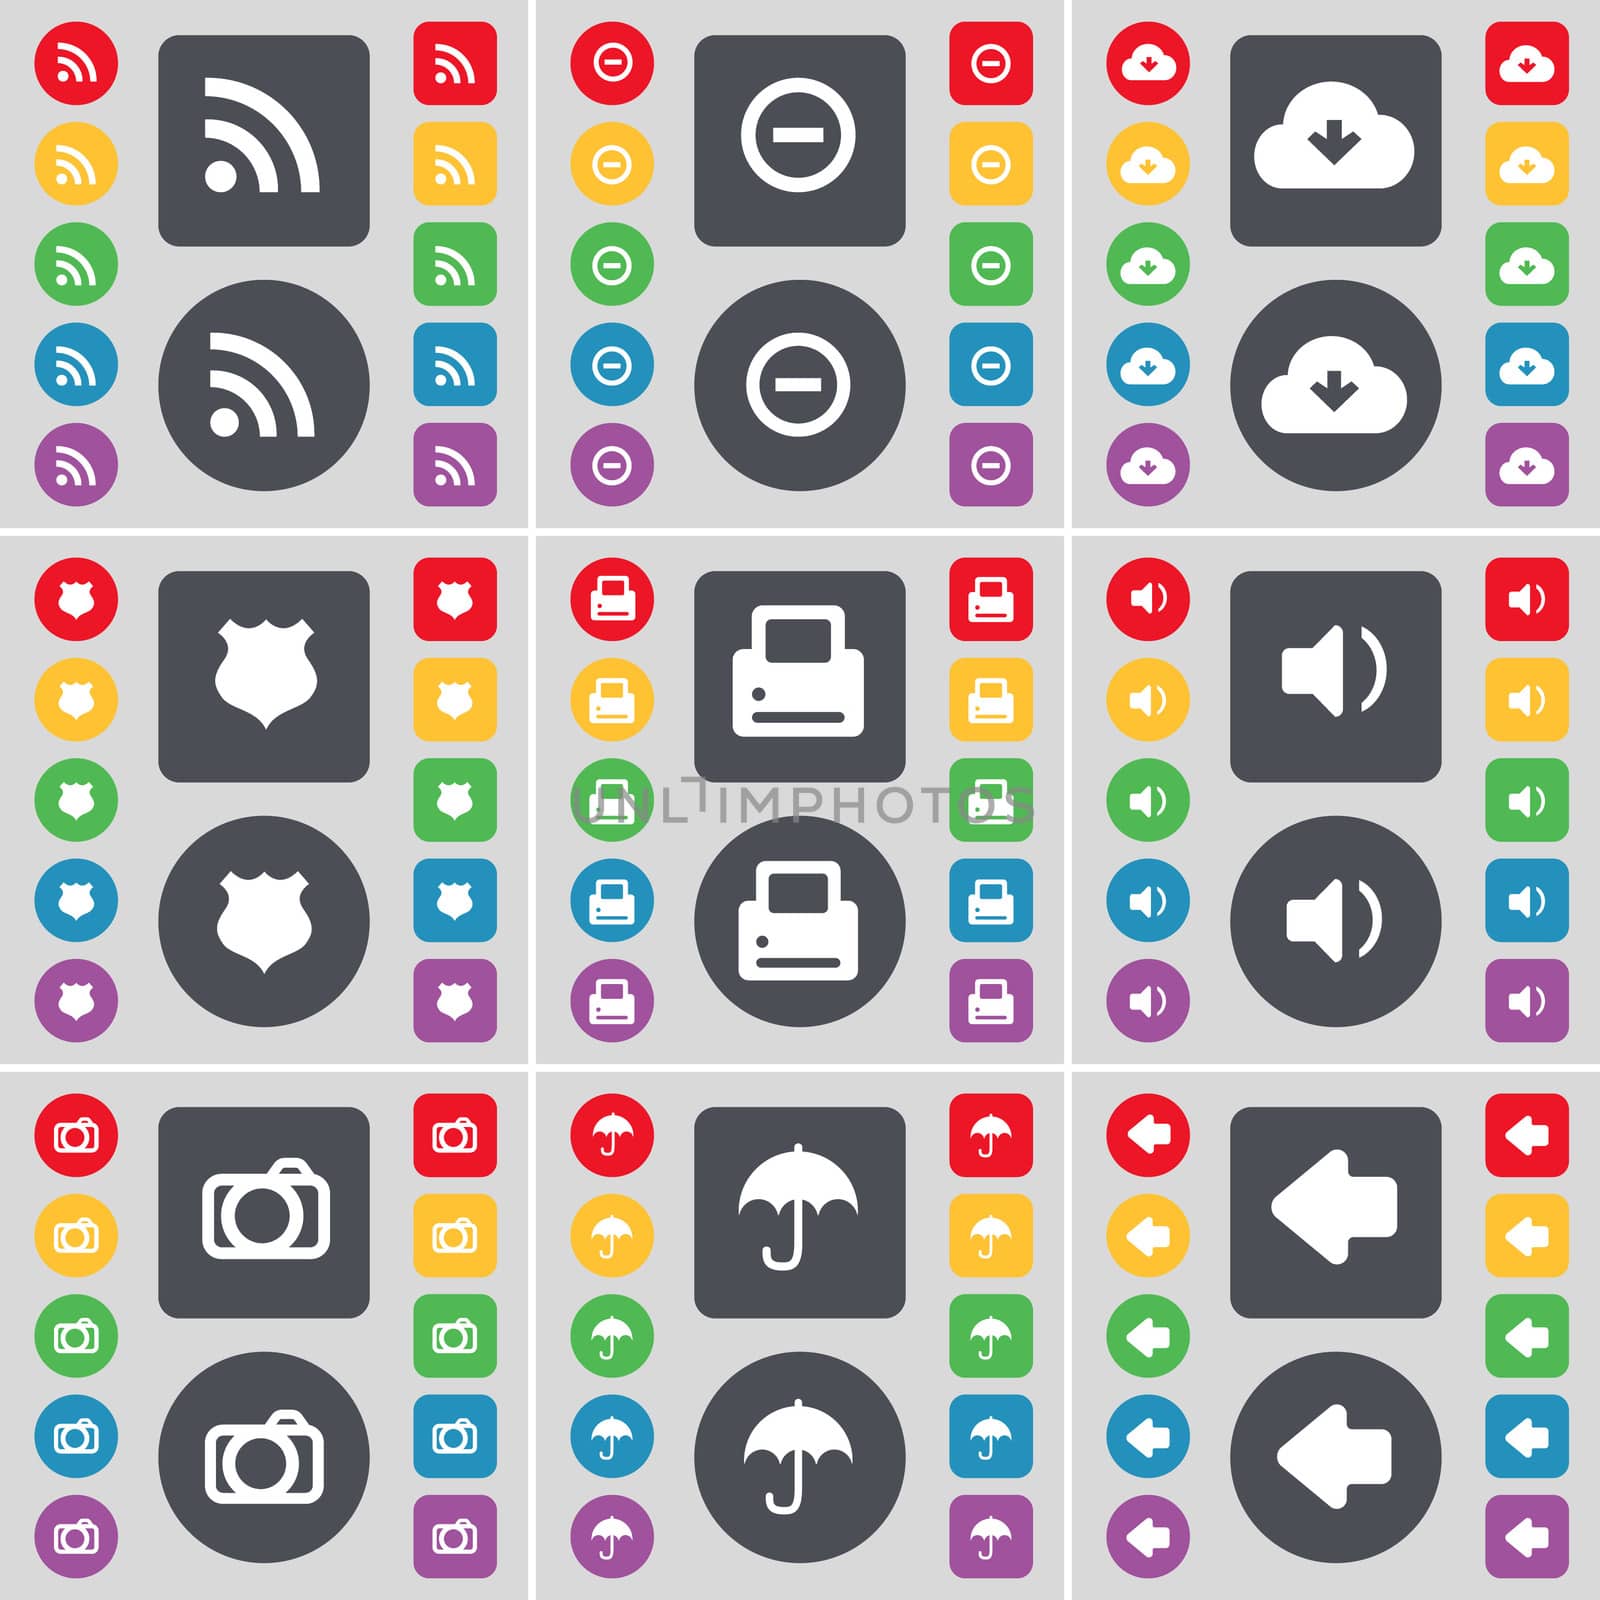 RSS, Minus, Cloud, Police badge, Sound, Camera, Umbrella, Arrow left icon symbol. A large set of flat, colored buttons for your design.  by serhii_lohvyniuk